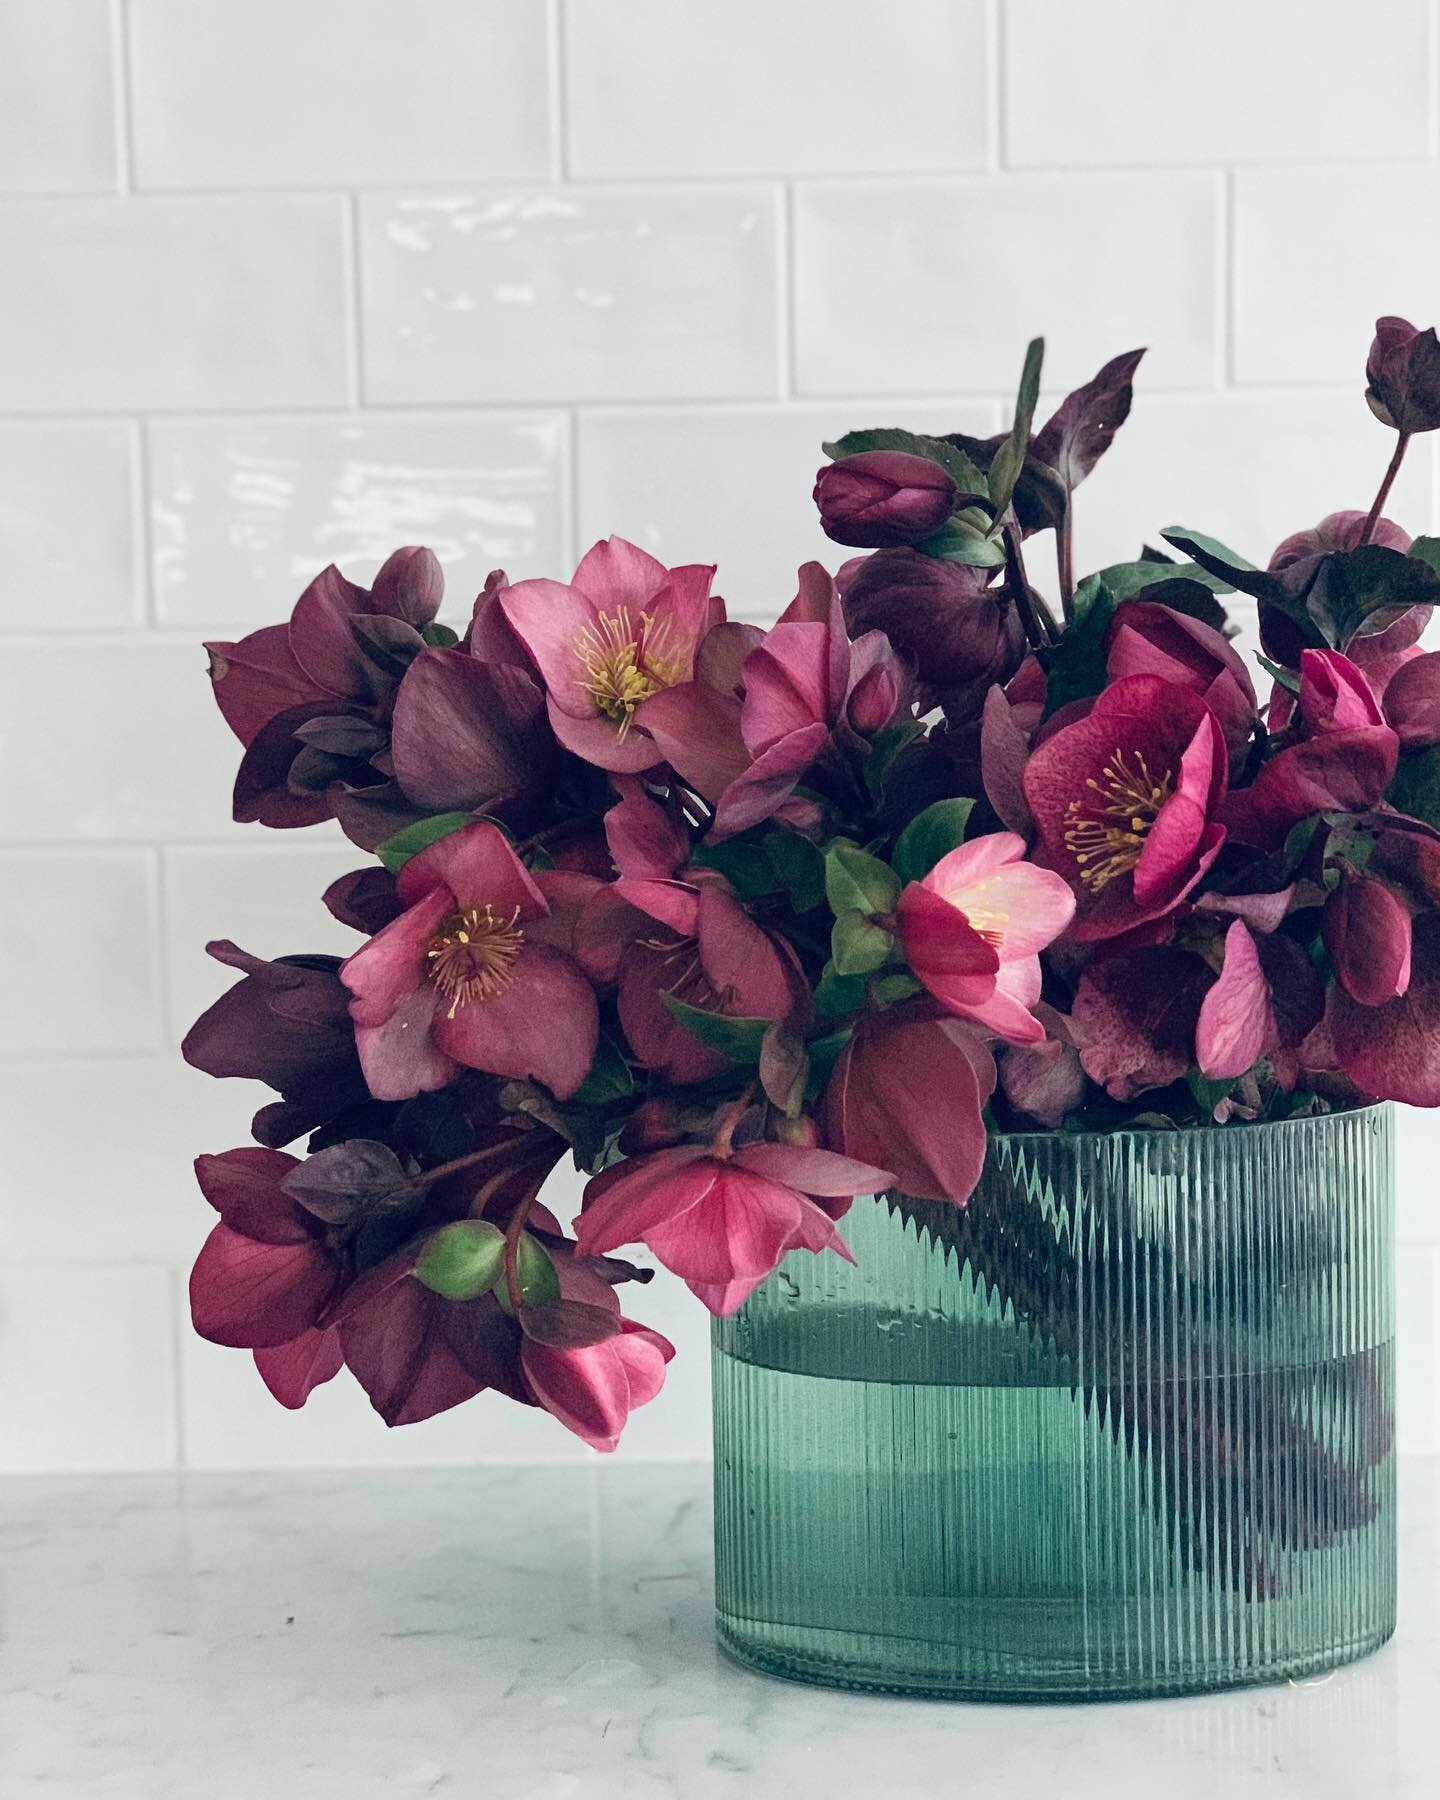 Hellebores. 
Winter roses. 
Classic beauties for a very special person on a very special birthday. ❤️@virginiamergen